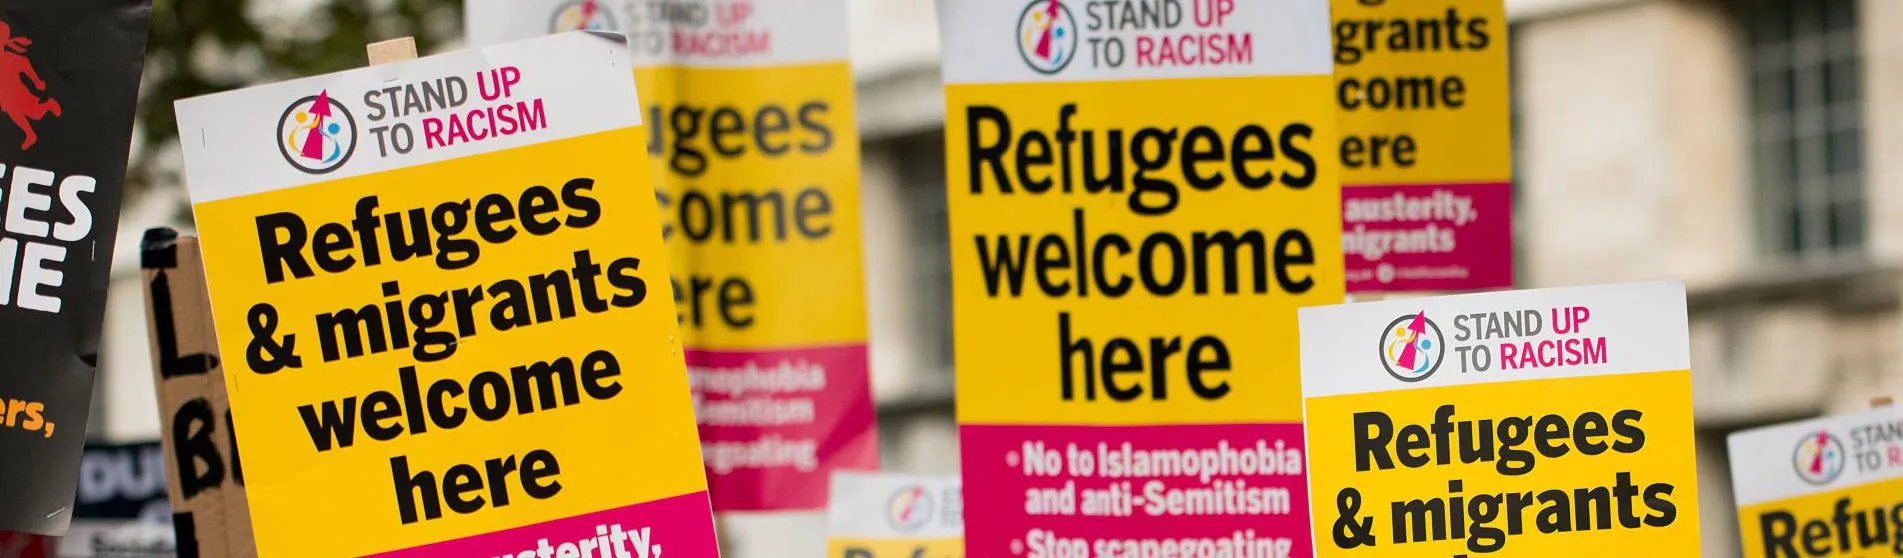 People at refugee protest holding 'refugees & migrants welcome here' signs